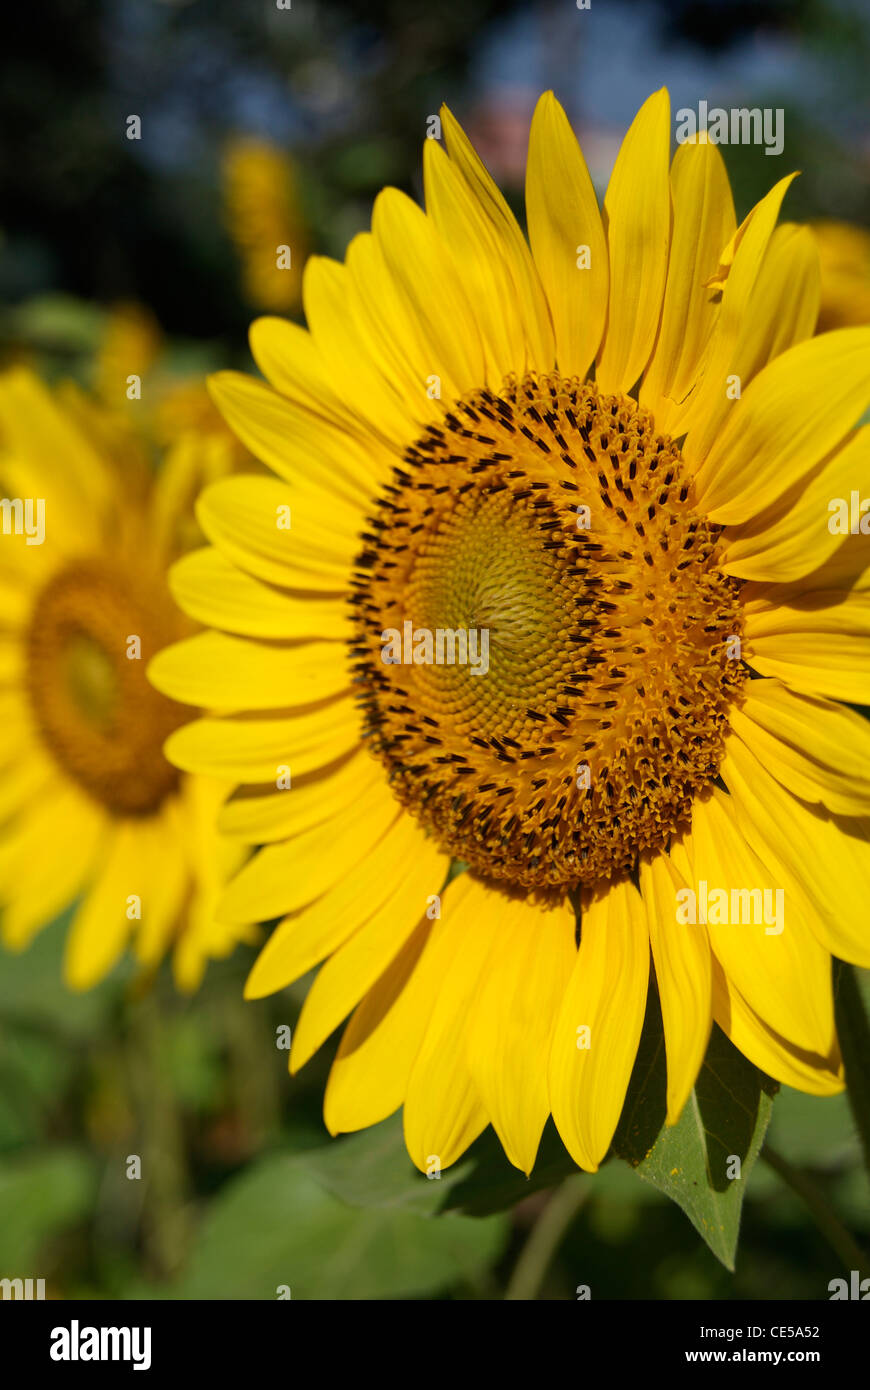 Side angle view of Sunflowers in garden Stock Photo